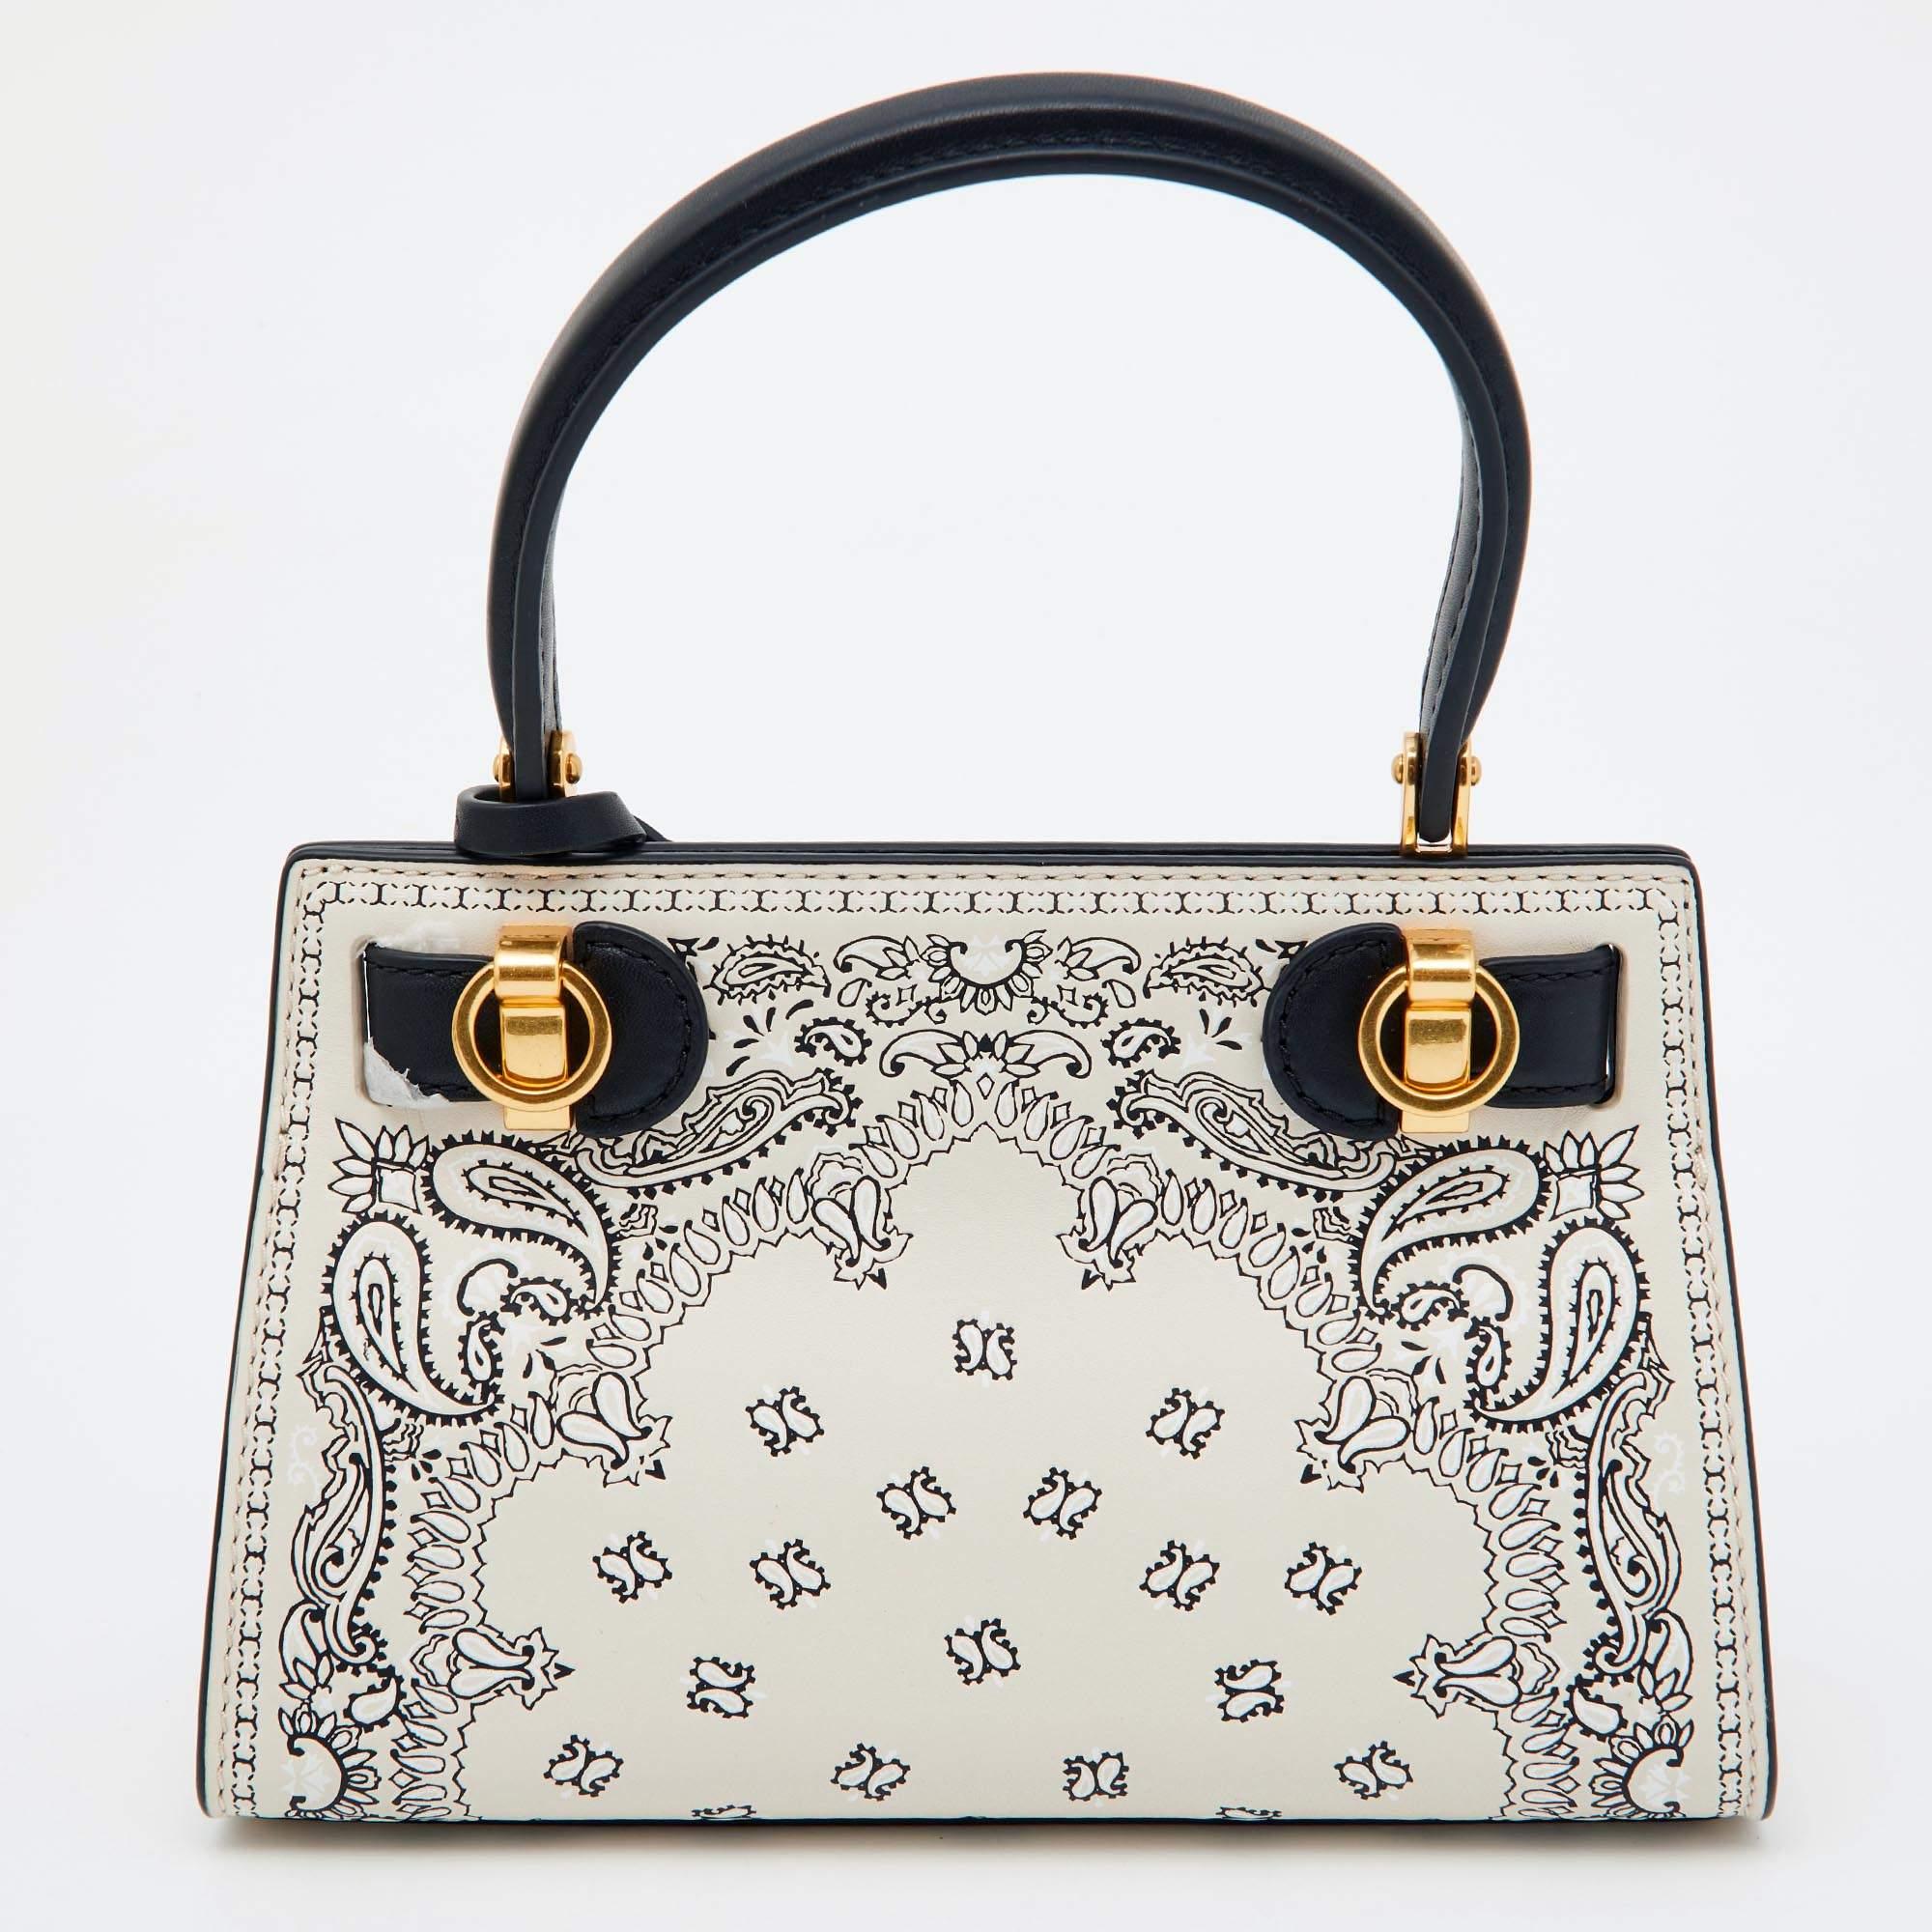 Indulge in luxury with this Tory Burch bag. Meticulously crafted from premium materials, it combines exquisite design, impeccable craftsmanship, and timeless elegance. Elevate your style with this fashion accessory.

Includes: Original Dustbag,